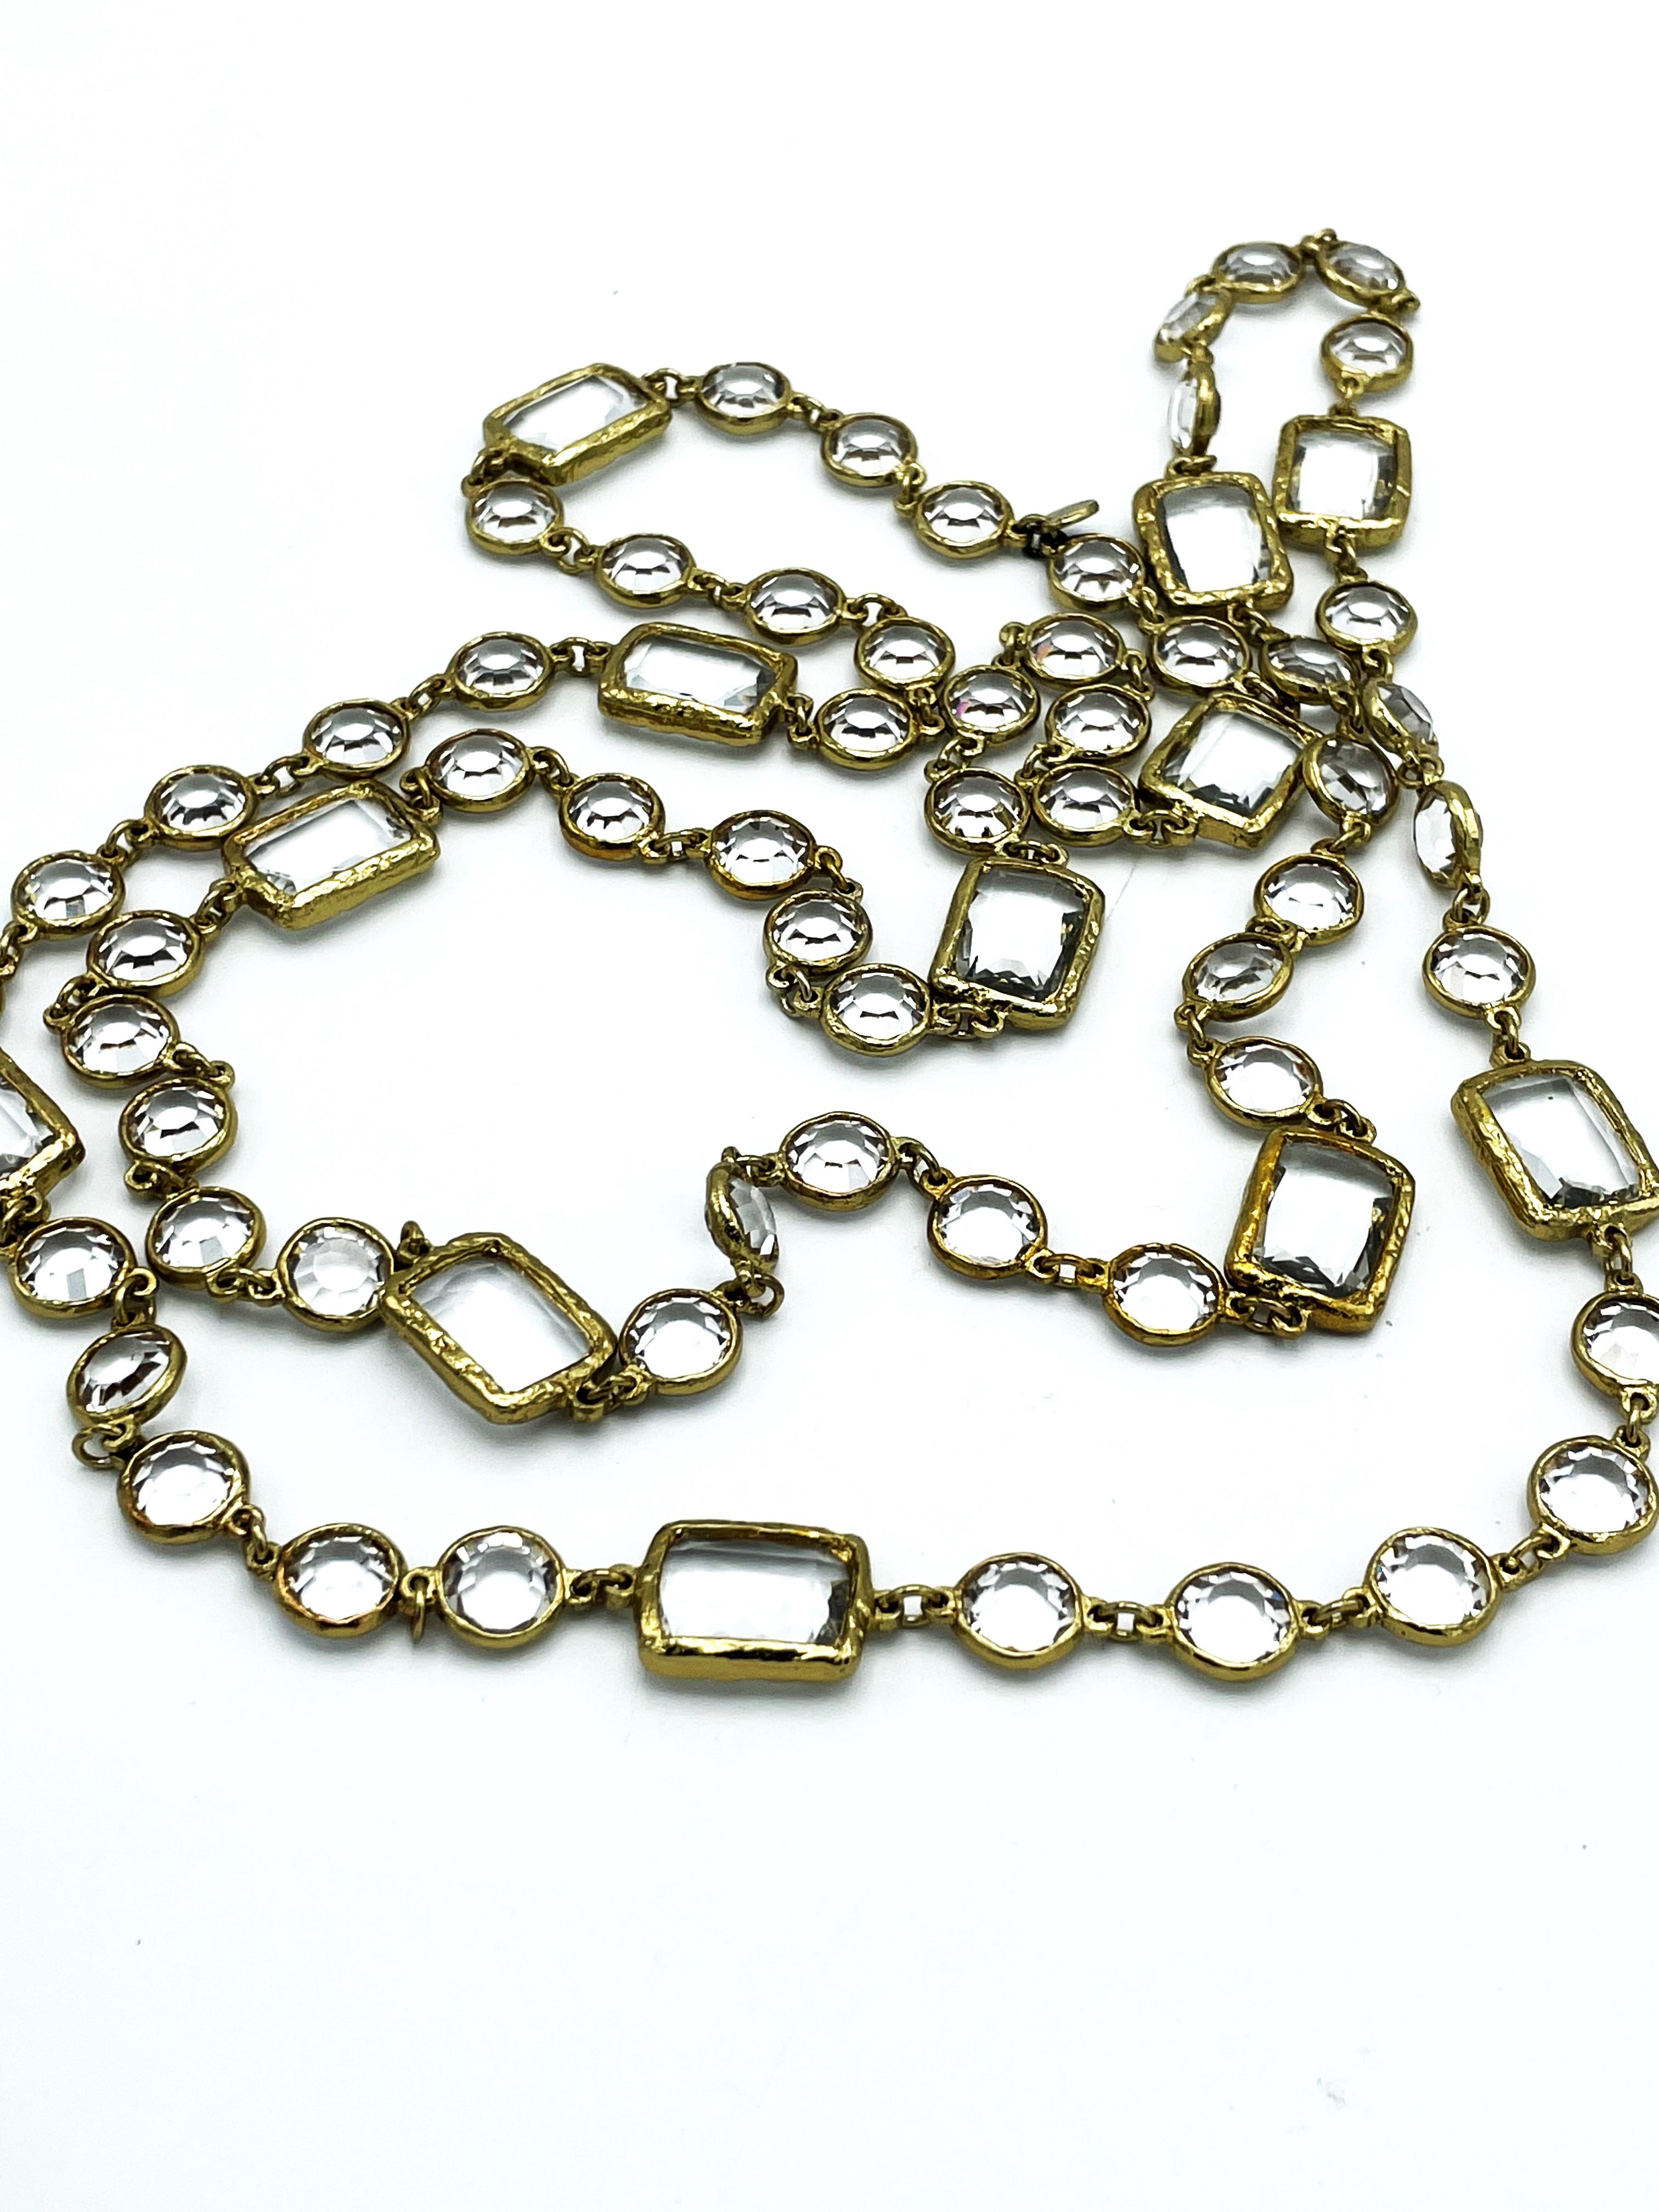 Vintage CHANEL Necklace/Sautoir with 12 clear Chicklets, signed 1981, gold plate 1